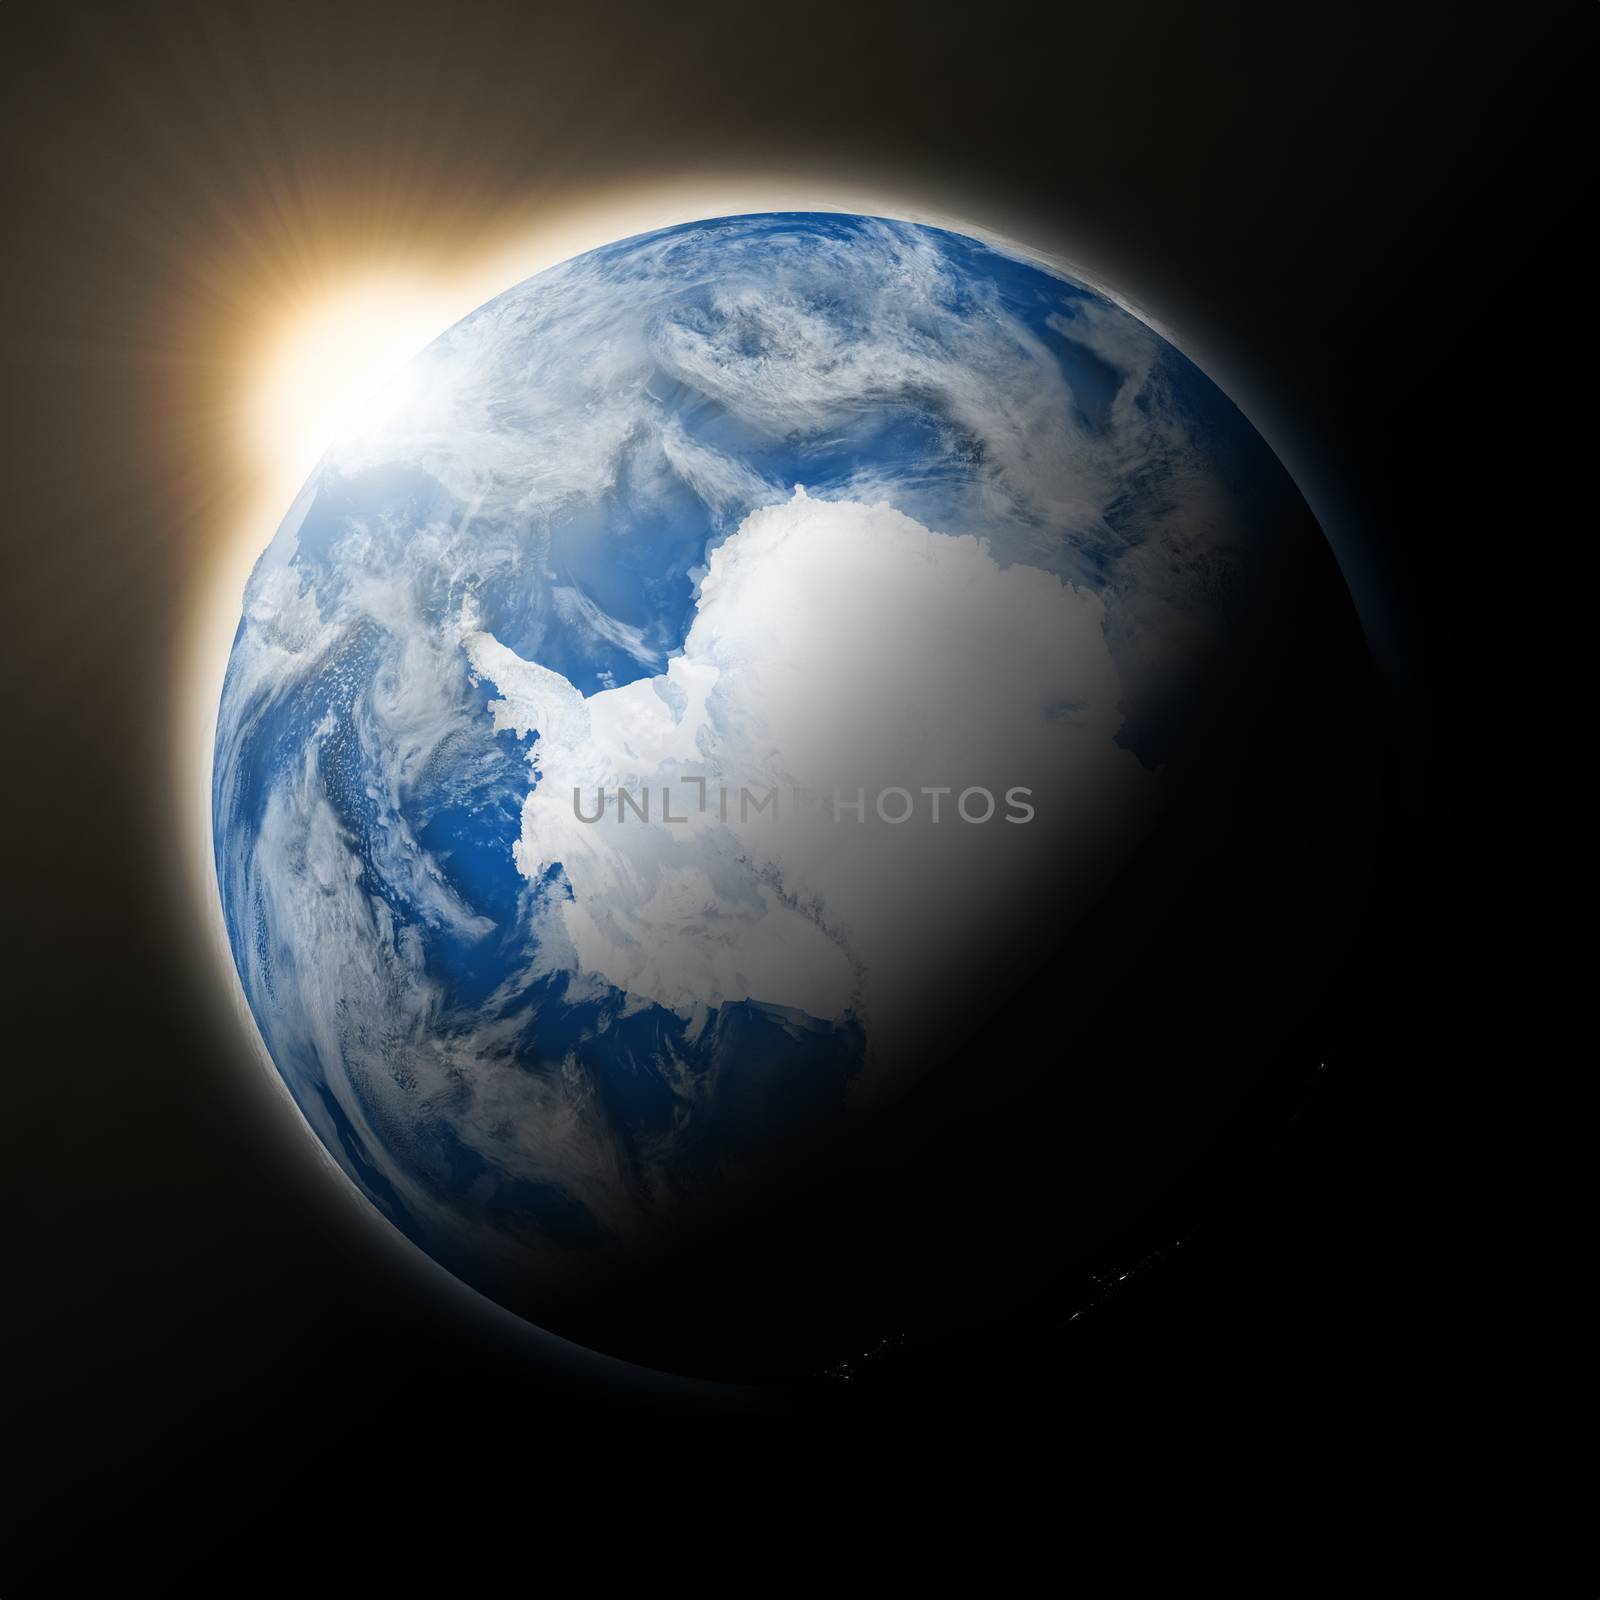 Sun over Antarctica on planet Earth by Harvepino